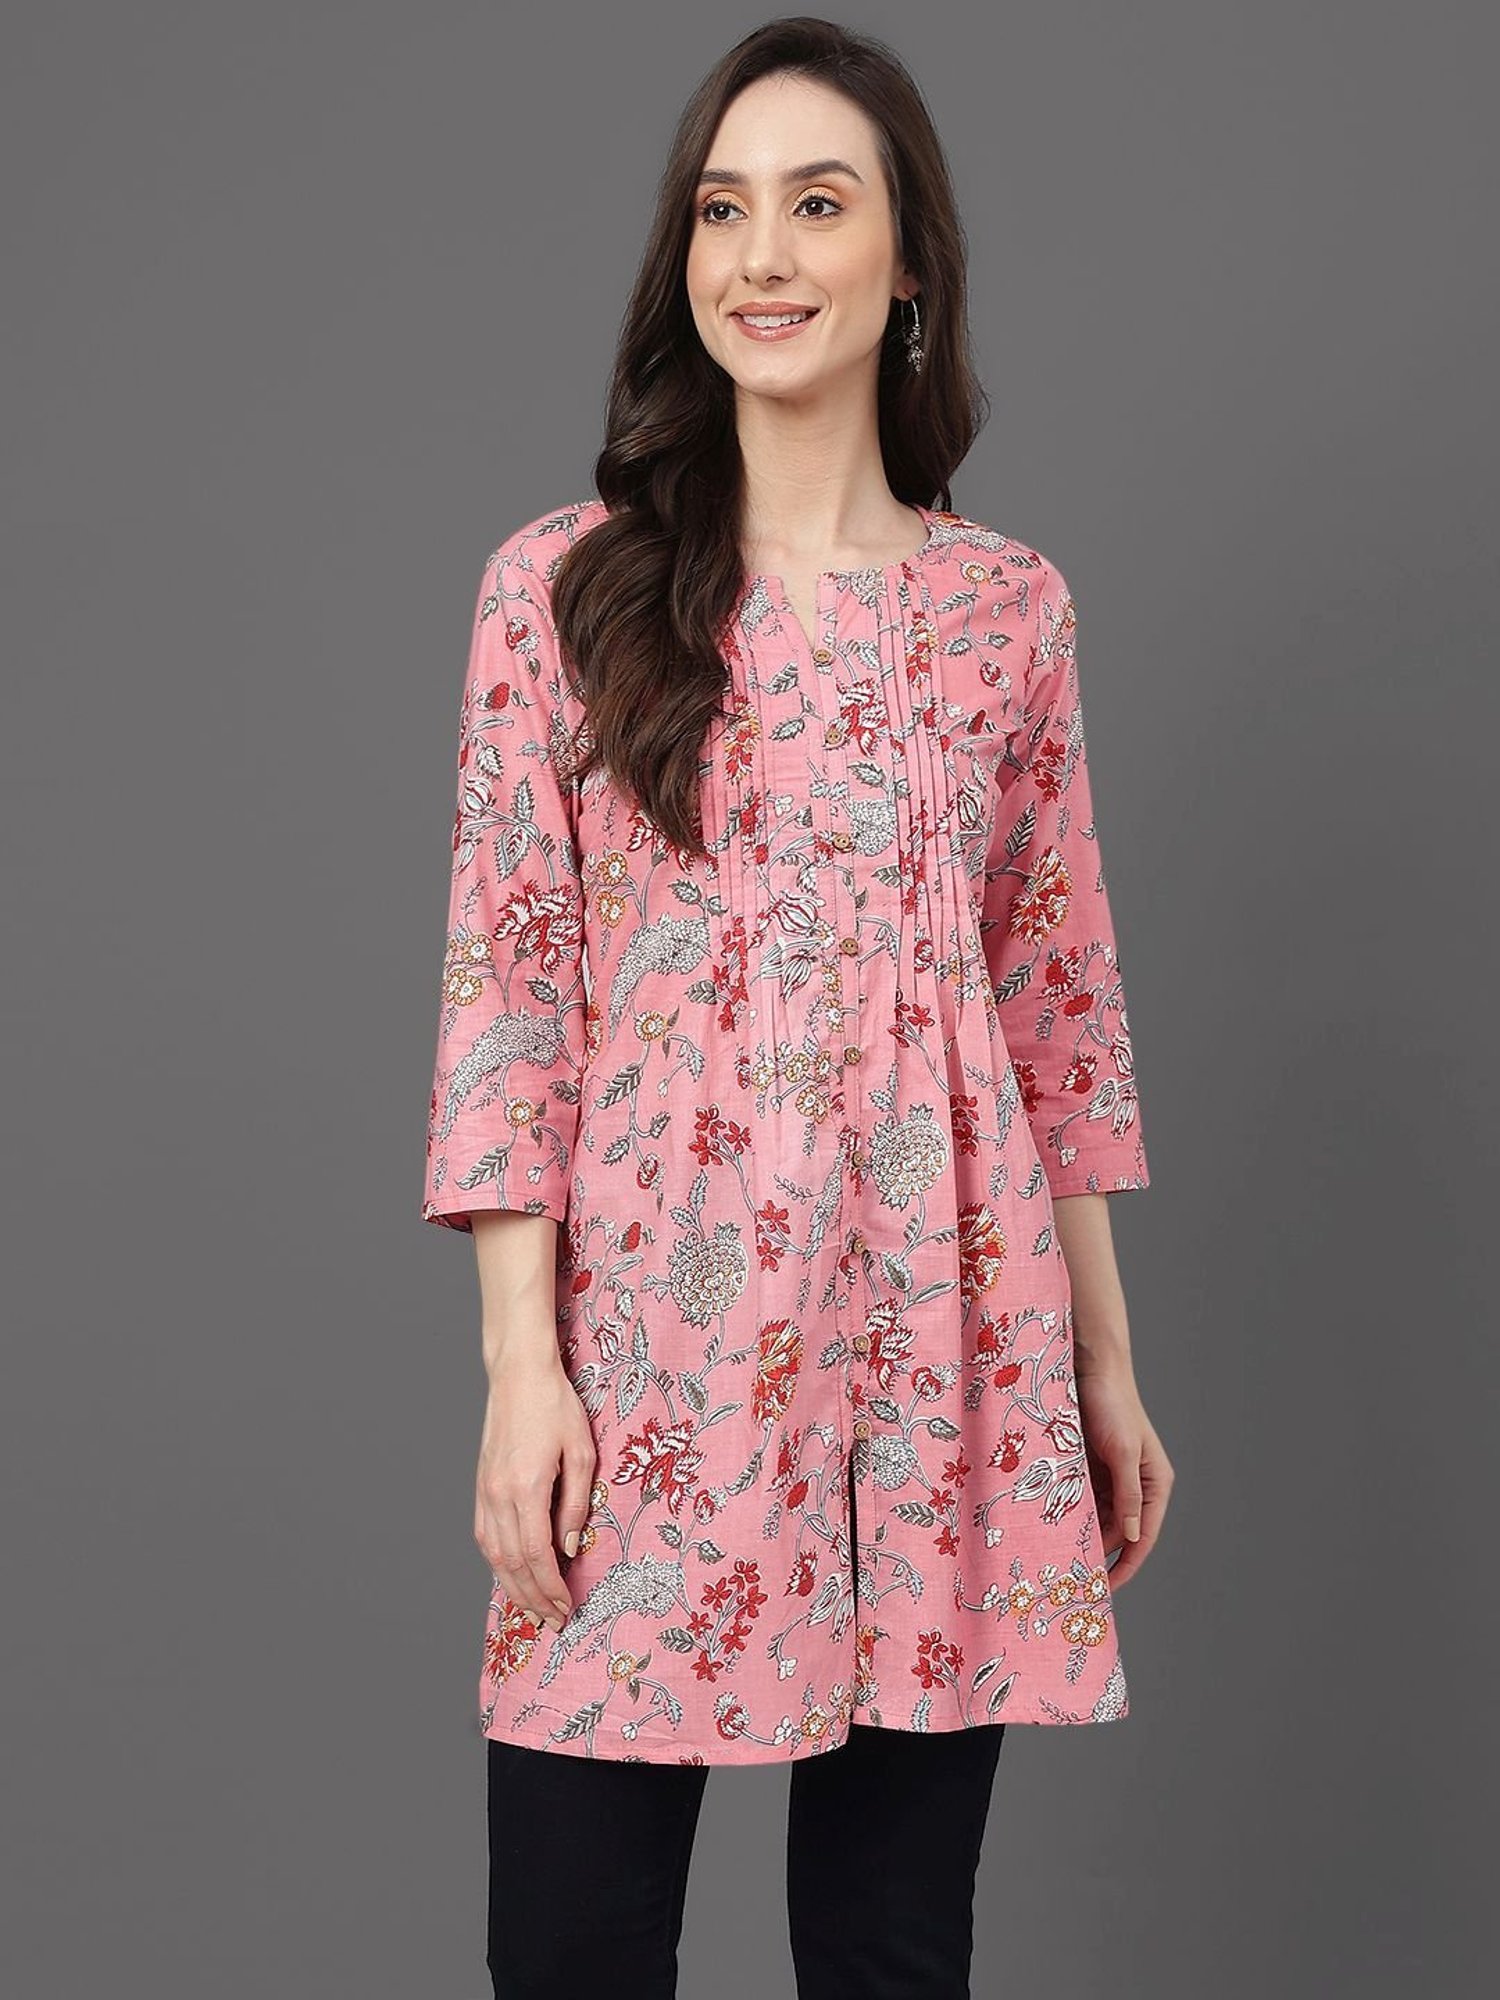 Rangmanch by Pantaloons Pink Embroidered Tunic